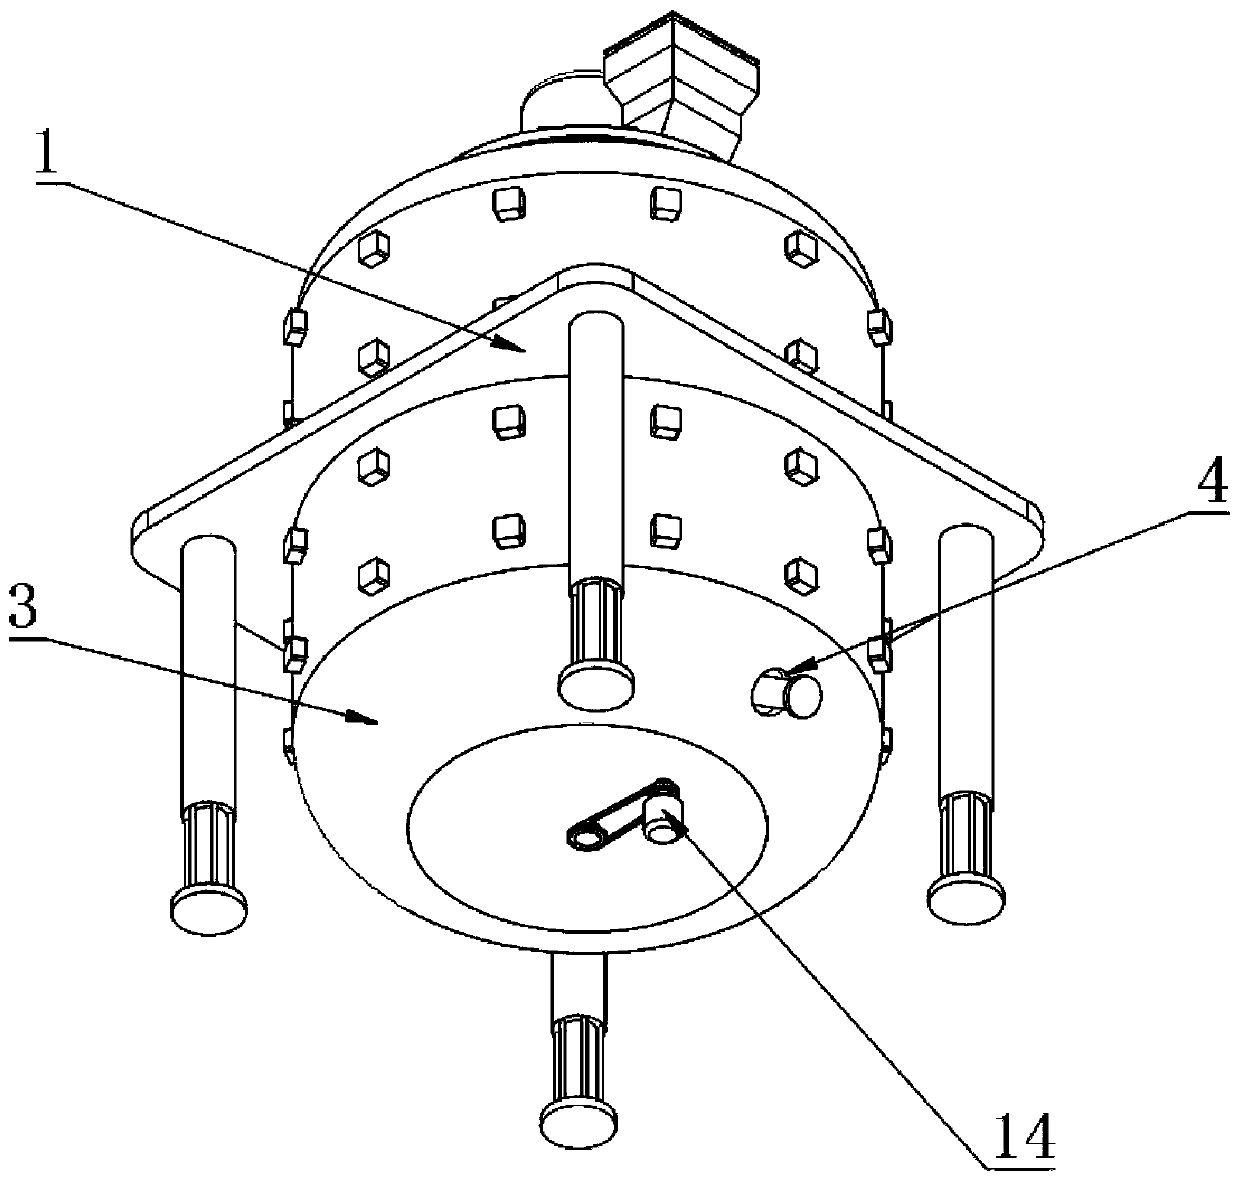 Batching device for sewage treatment system